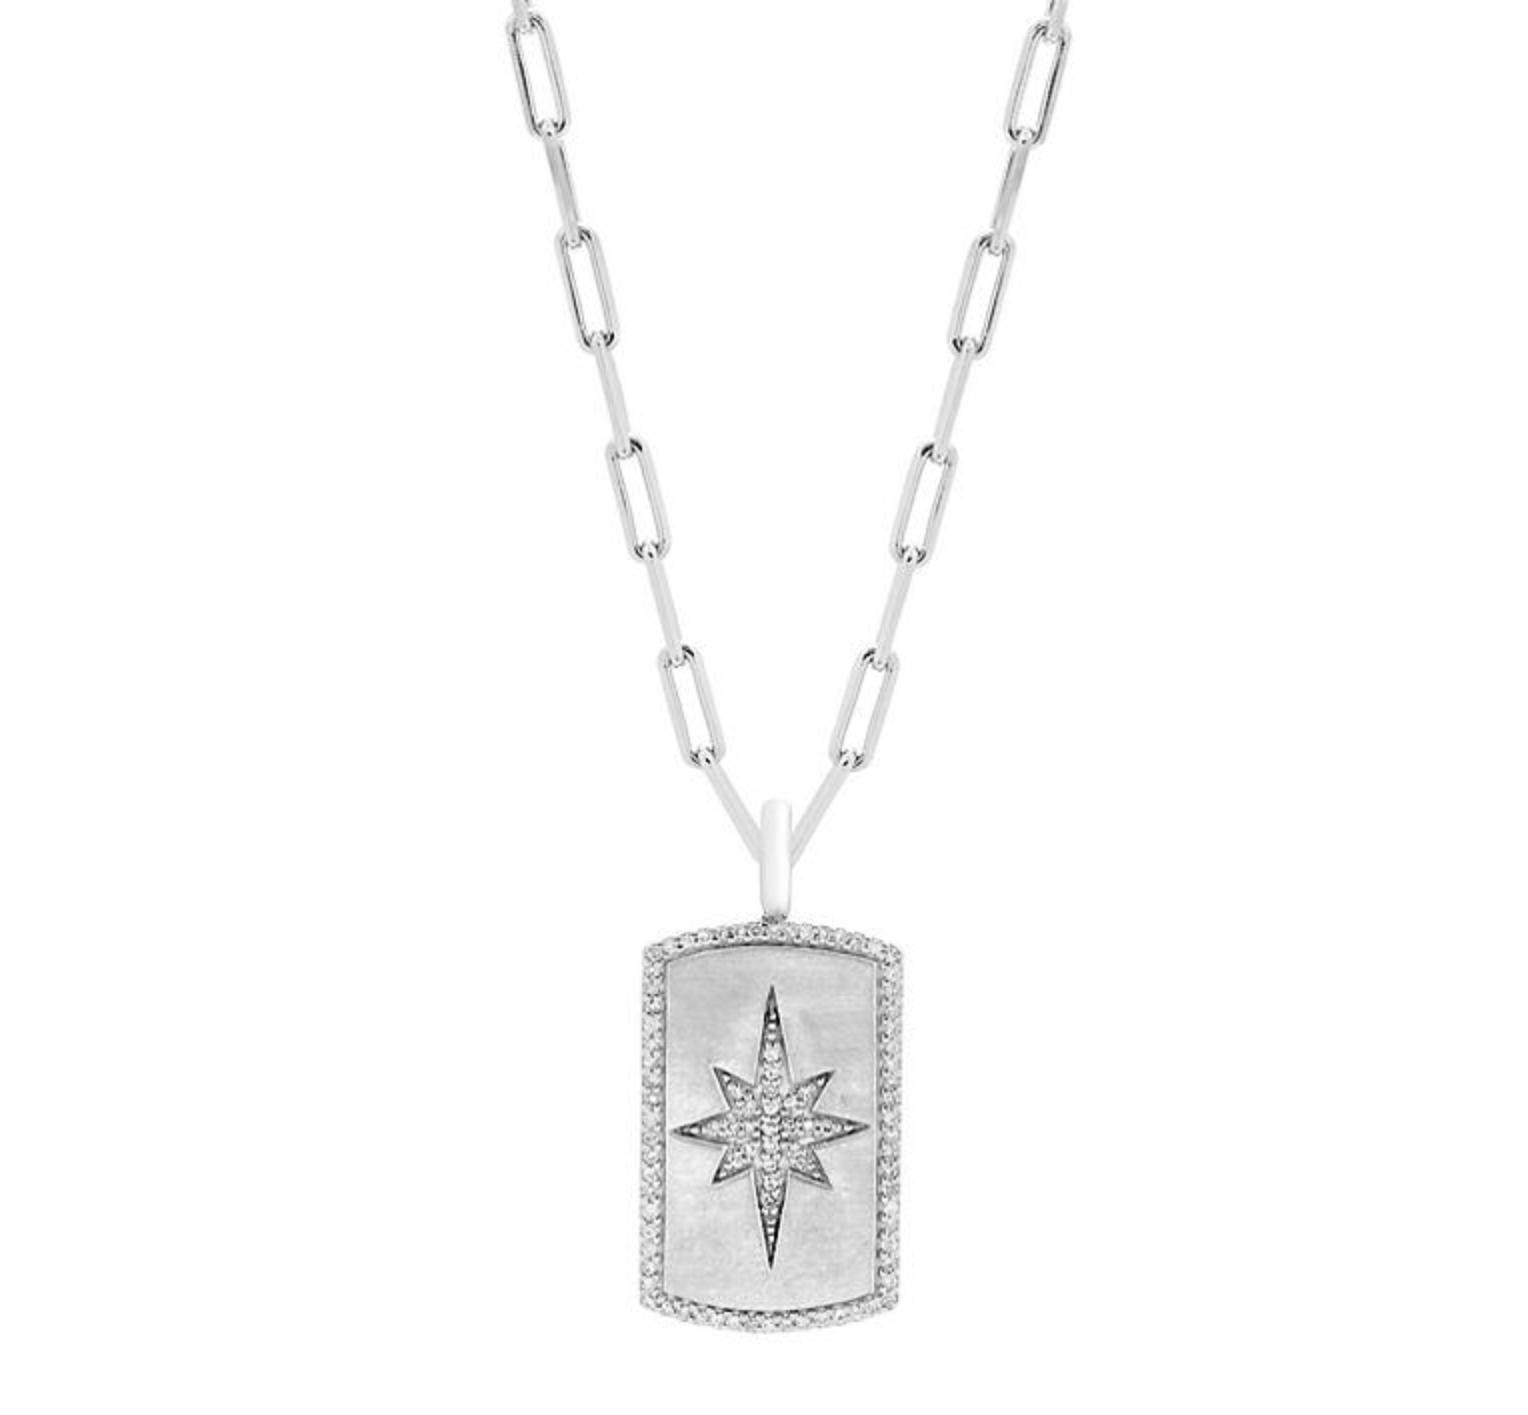 Silver chain necklace with northstar diamond dog tag